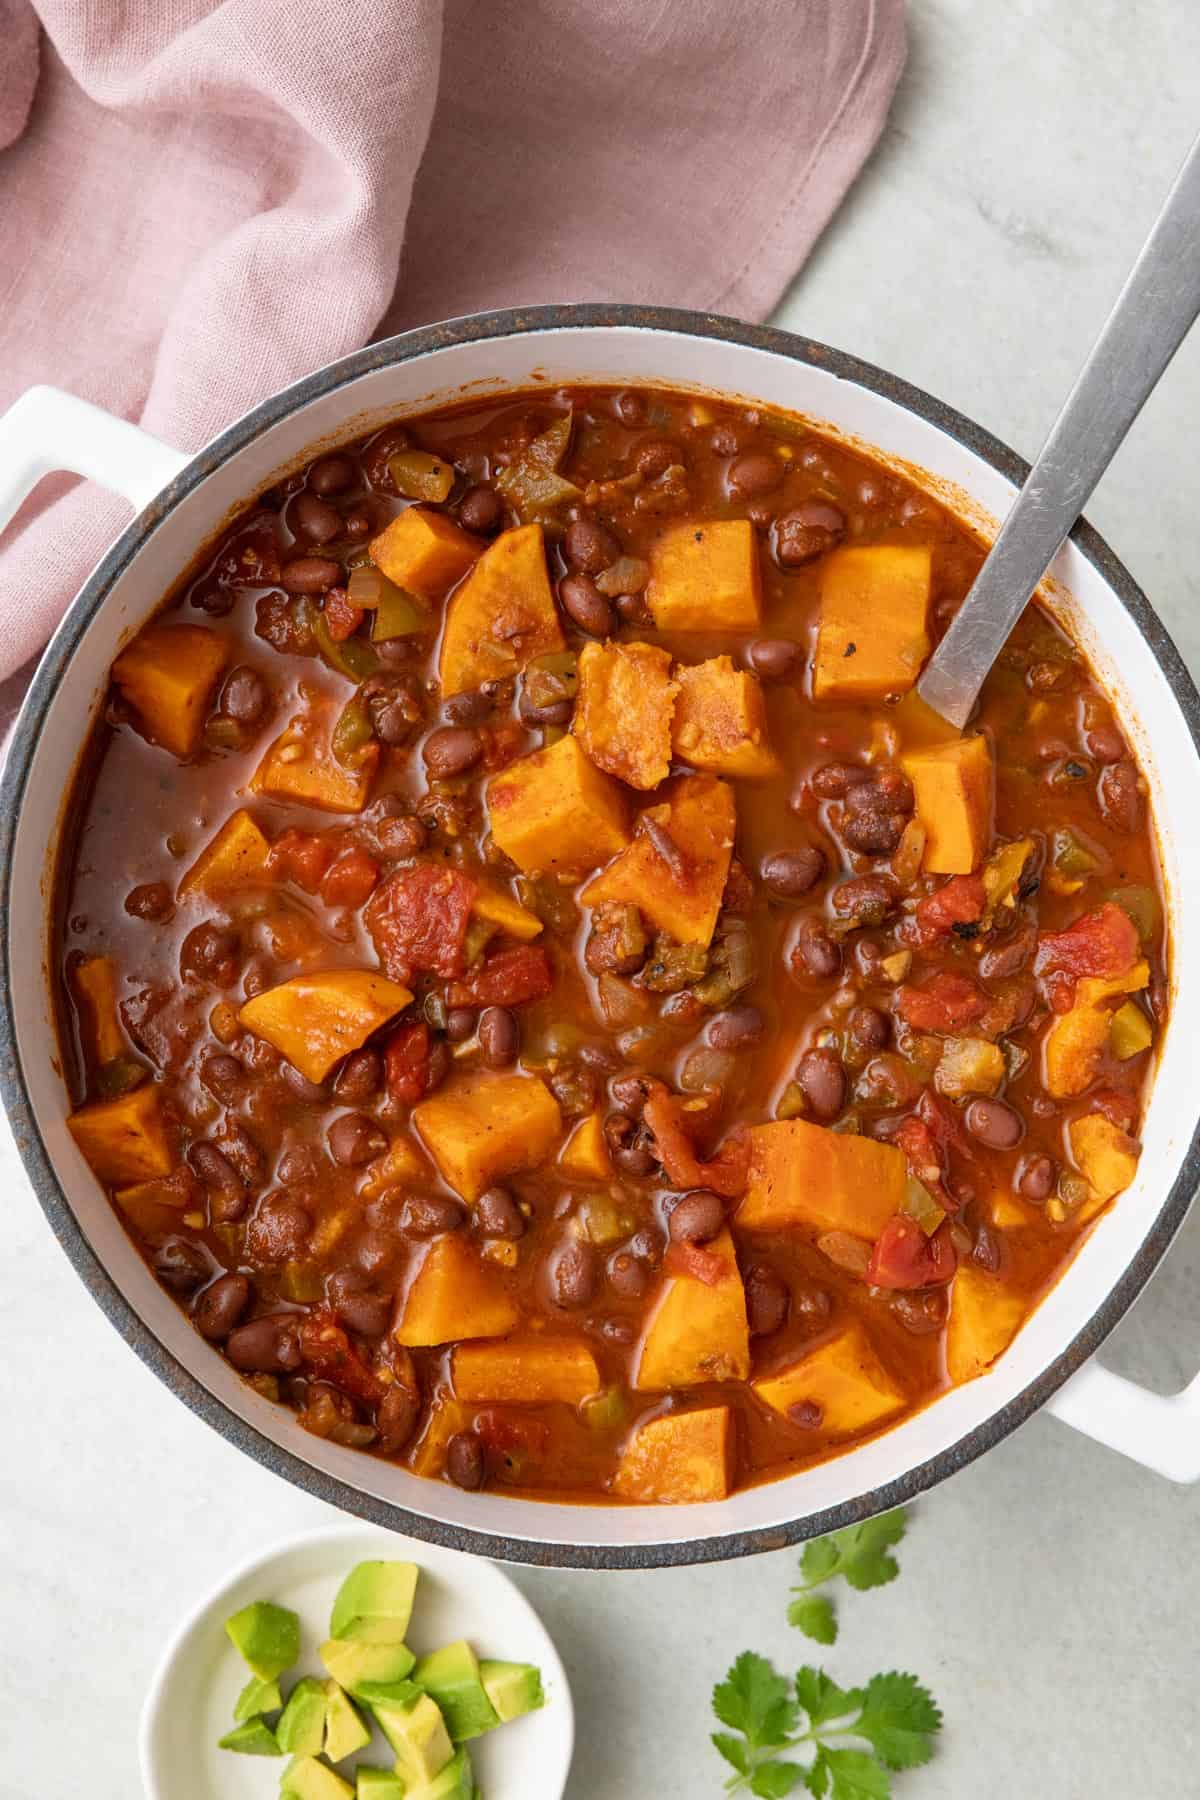 Sweet potato chili in pot with a ladle dipped inside. Small bowl of diced avocado nearby.